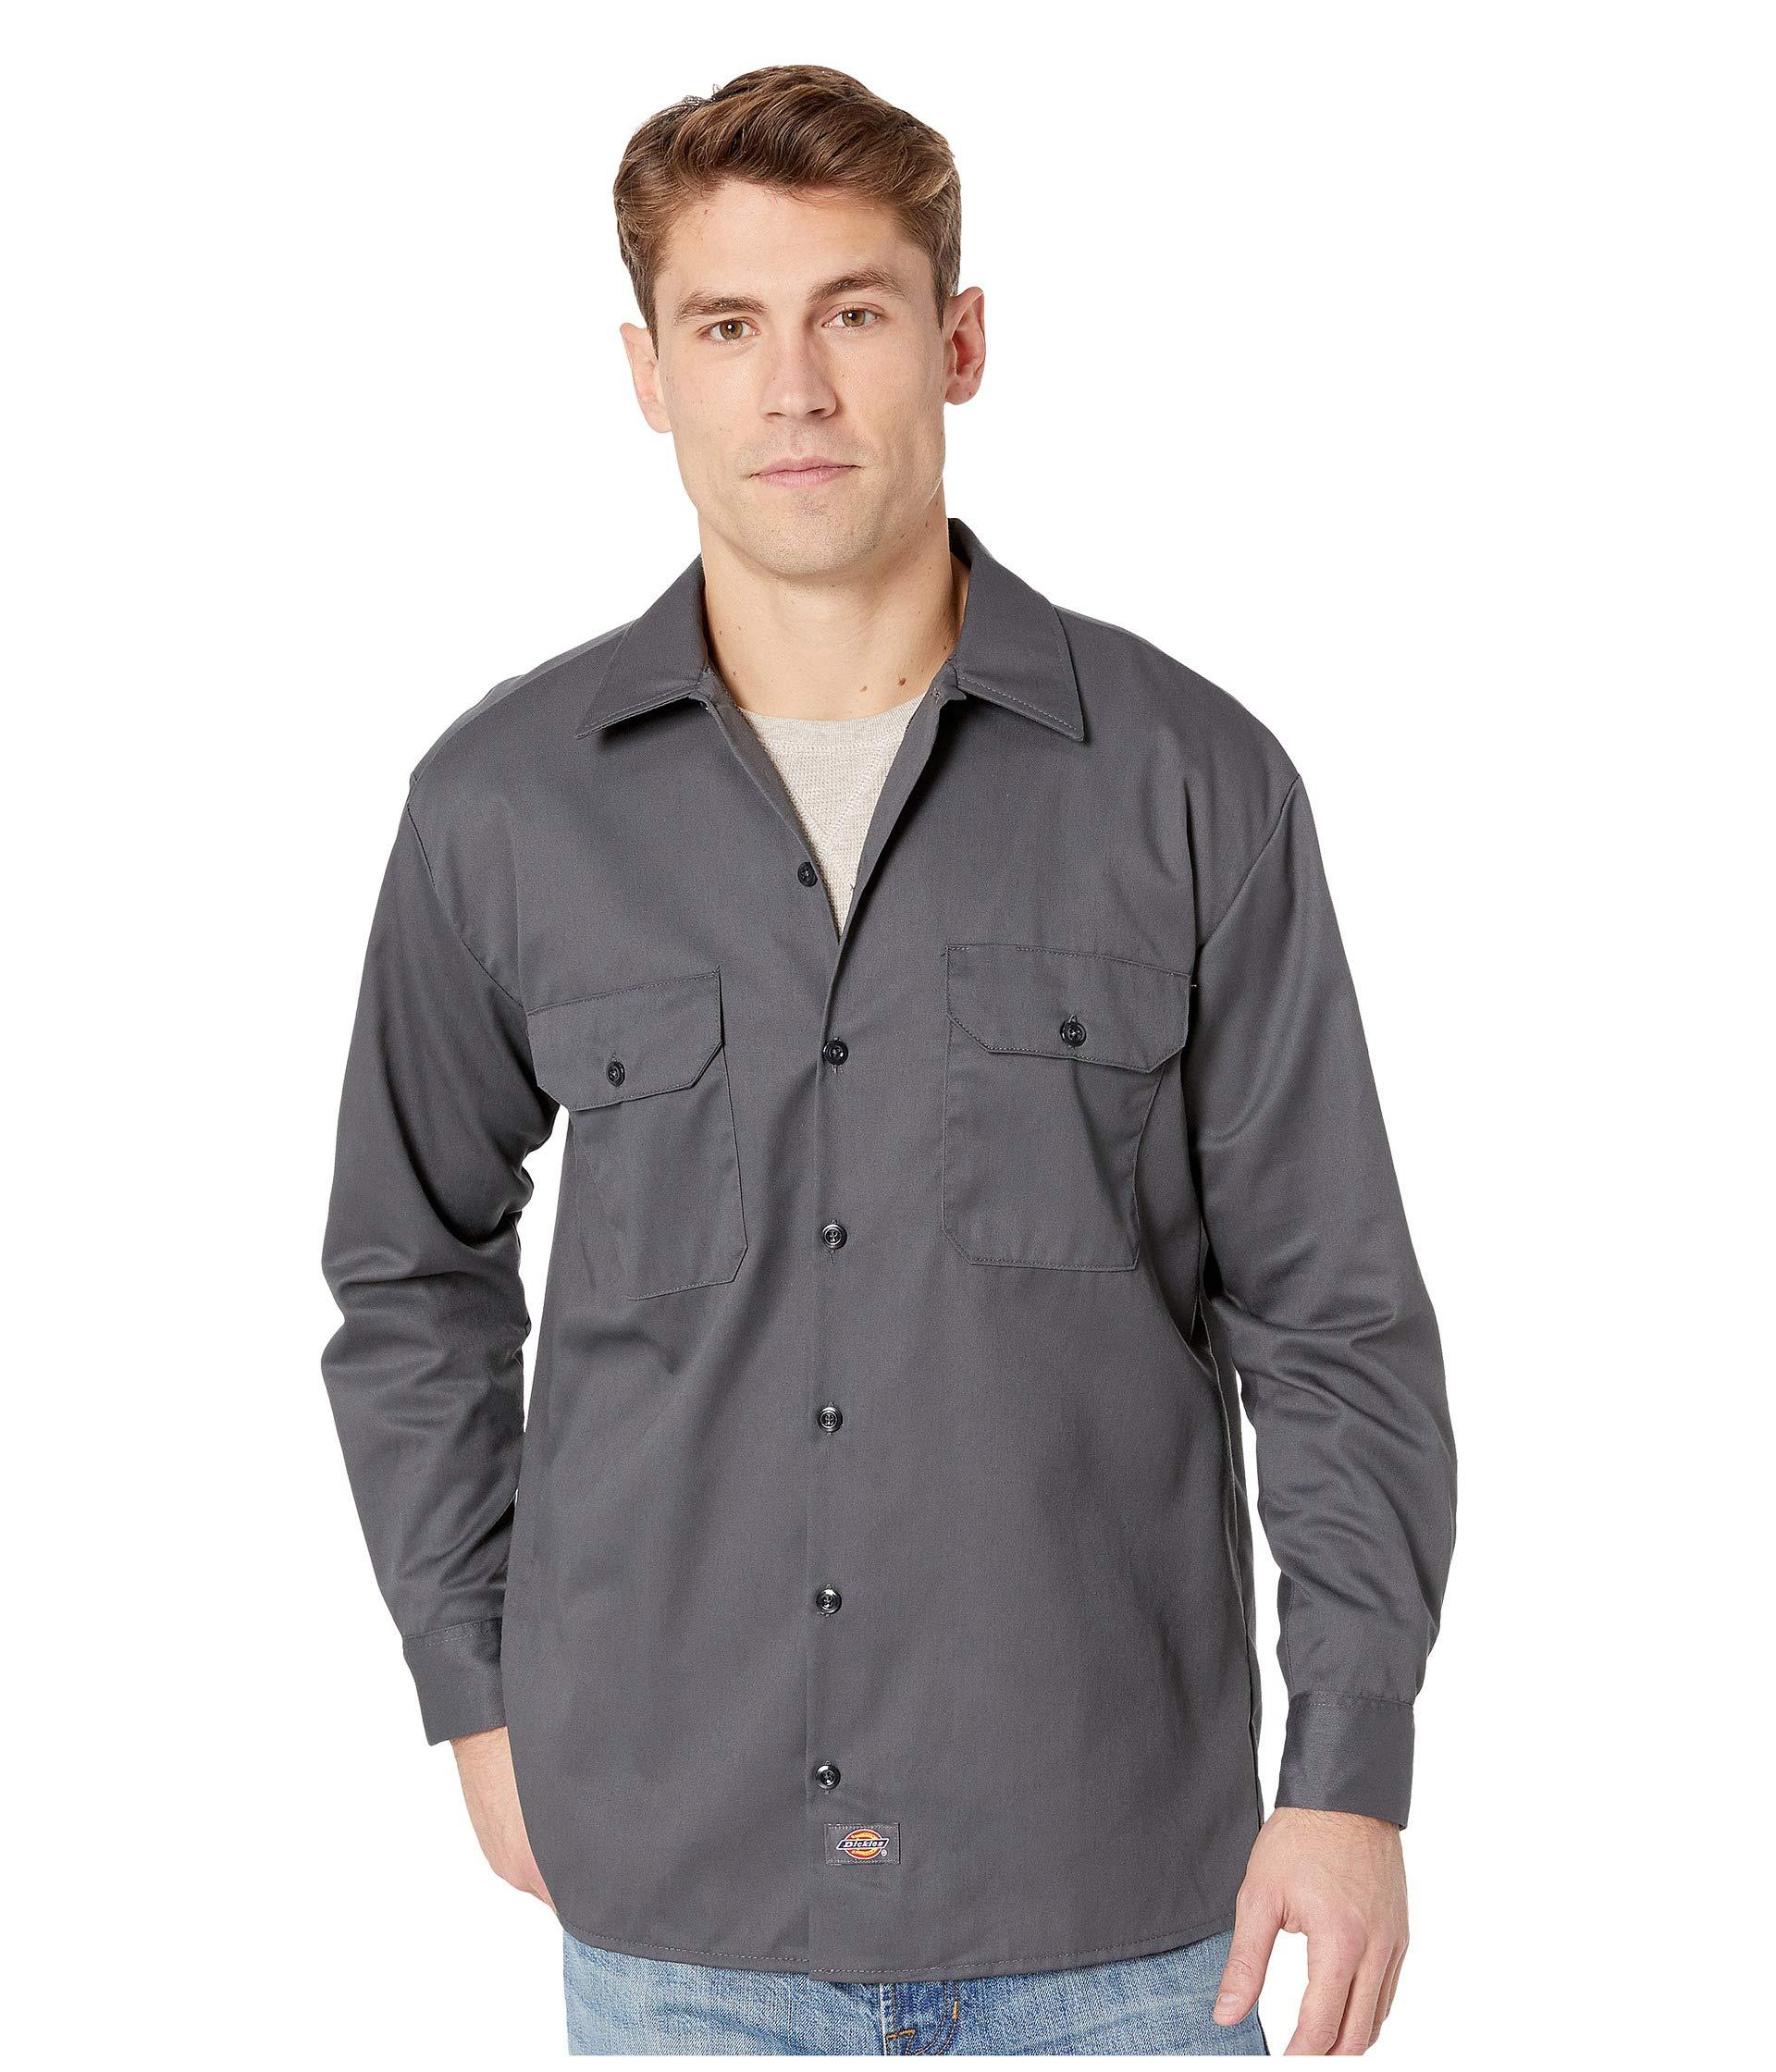 Dickies Synthetic Long Sleeve Work Shirt in Gray for Men - Lyst